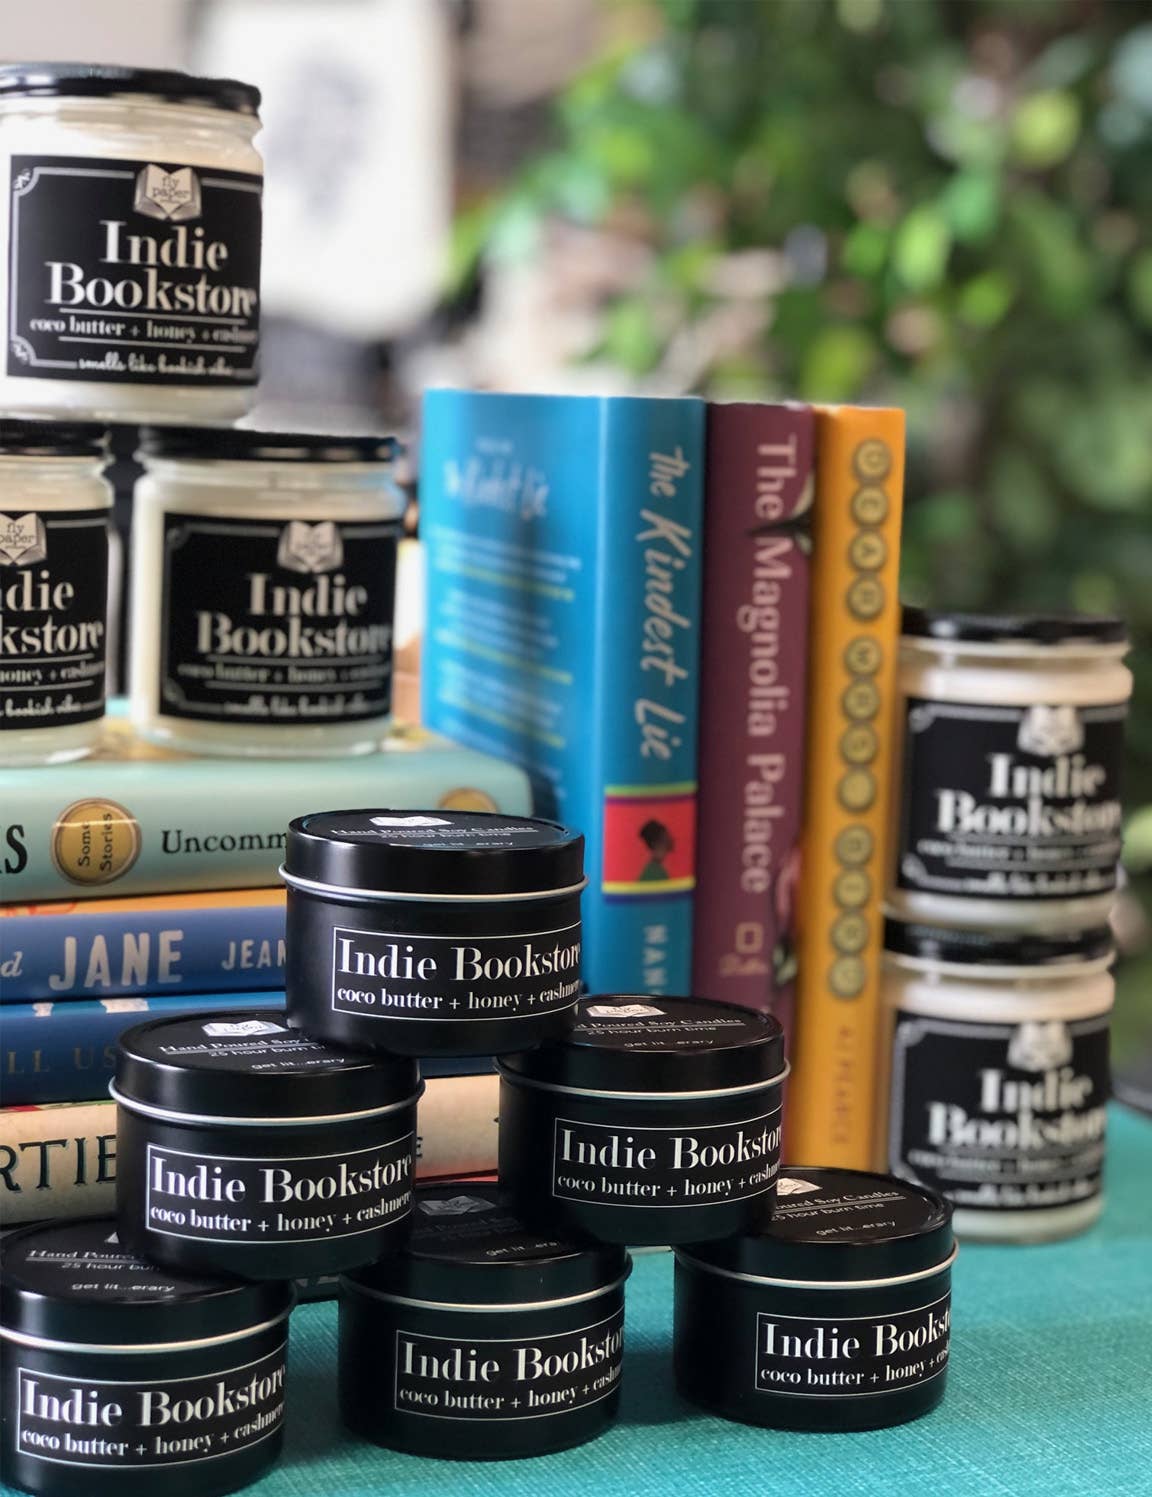 Fly Paper Products - Indie Bookstore 9oz Soy Candle Contest Winner